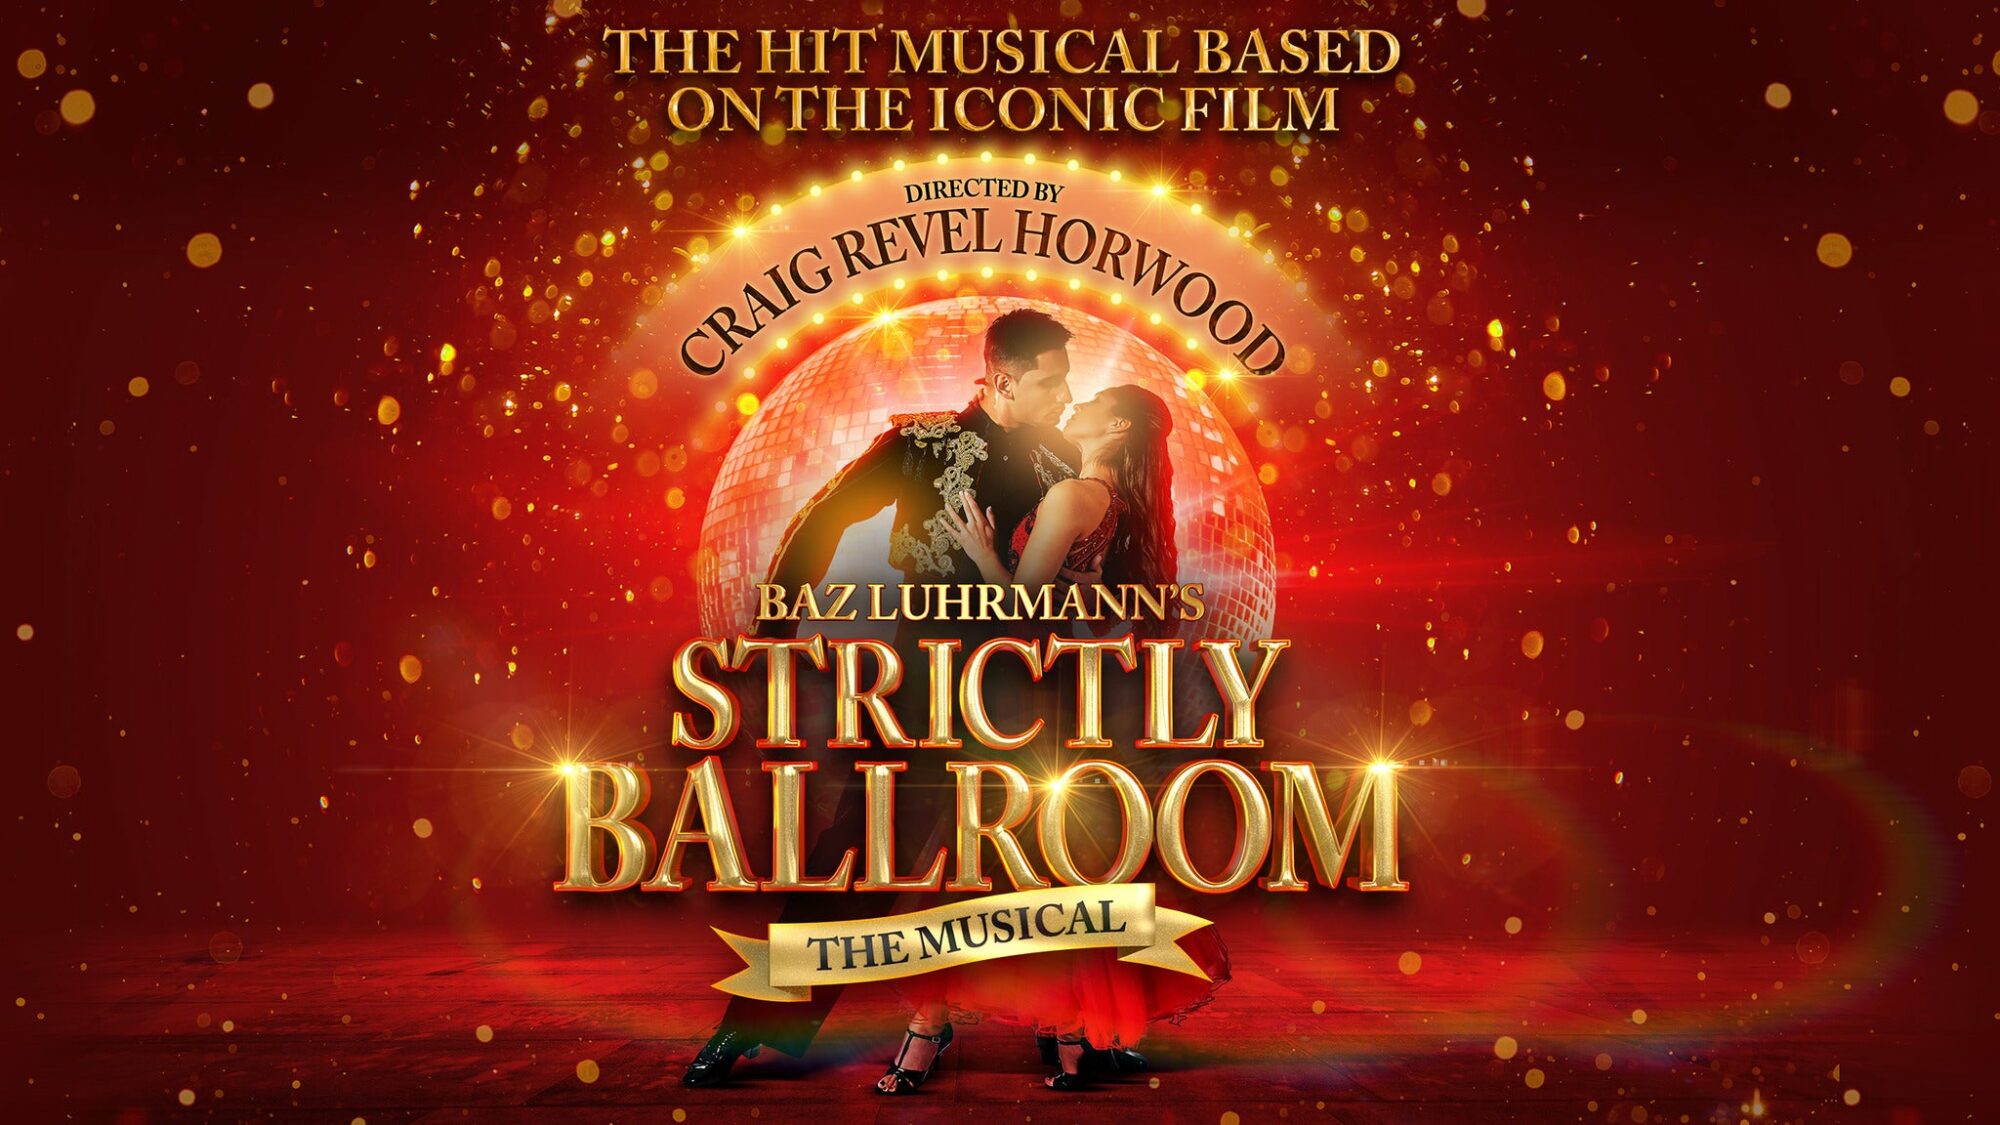 Image name Strictly Ballroom The Musical at Hull New Theatre Hull the 28 image from the post Events in Yorkshire.com.